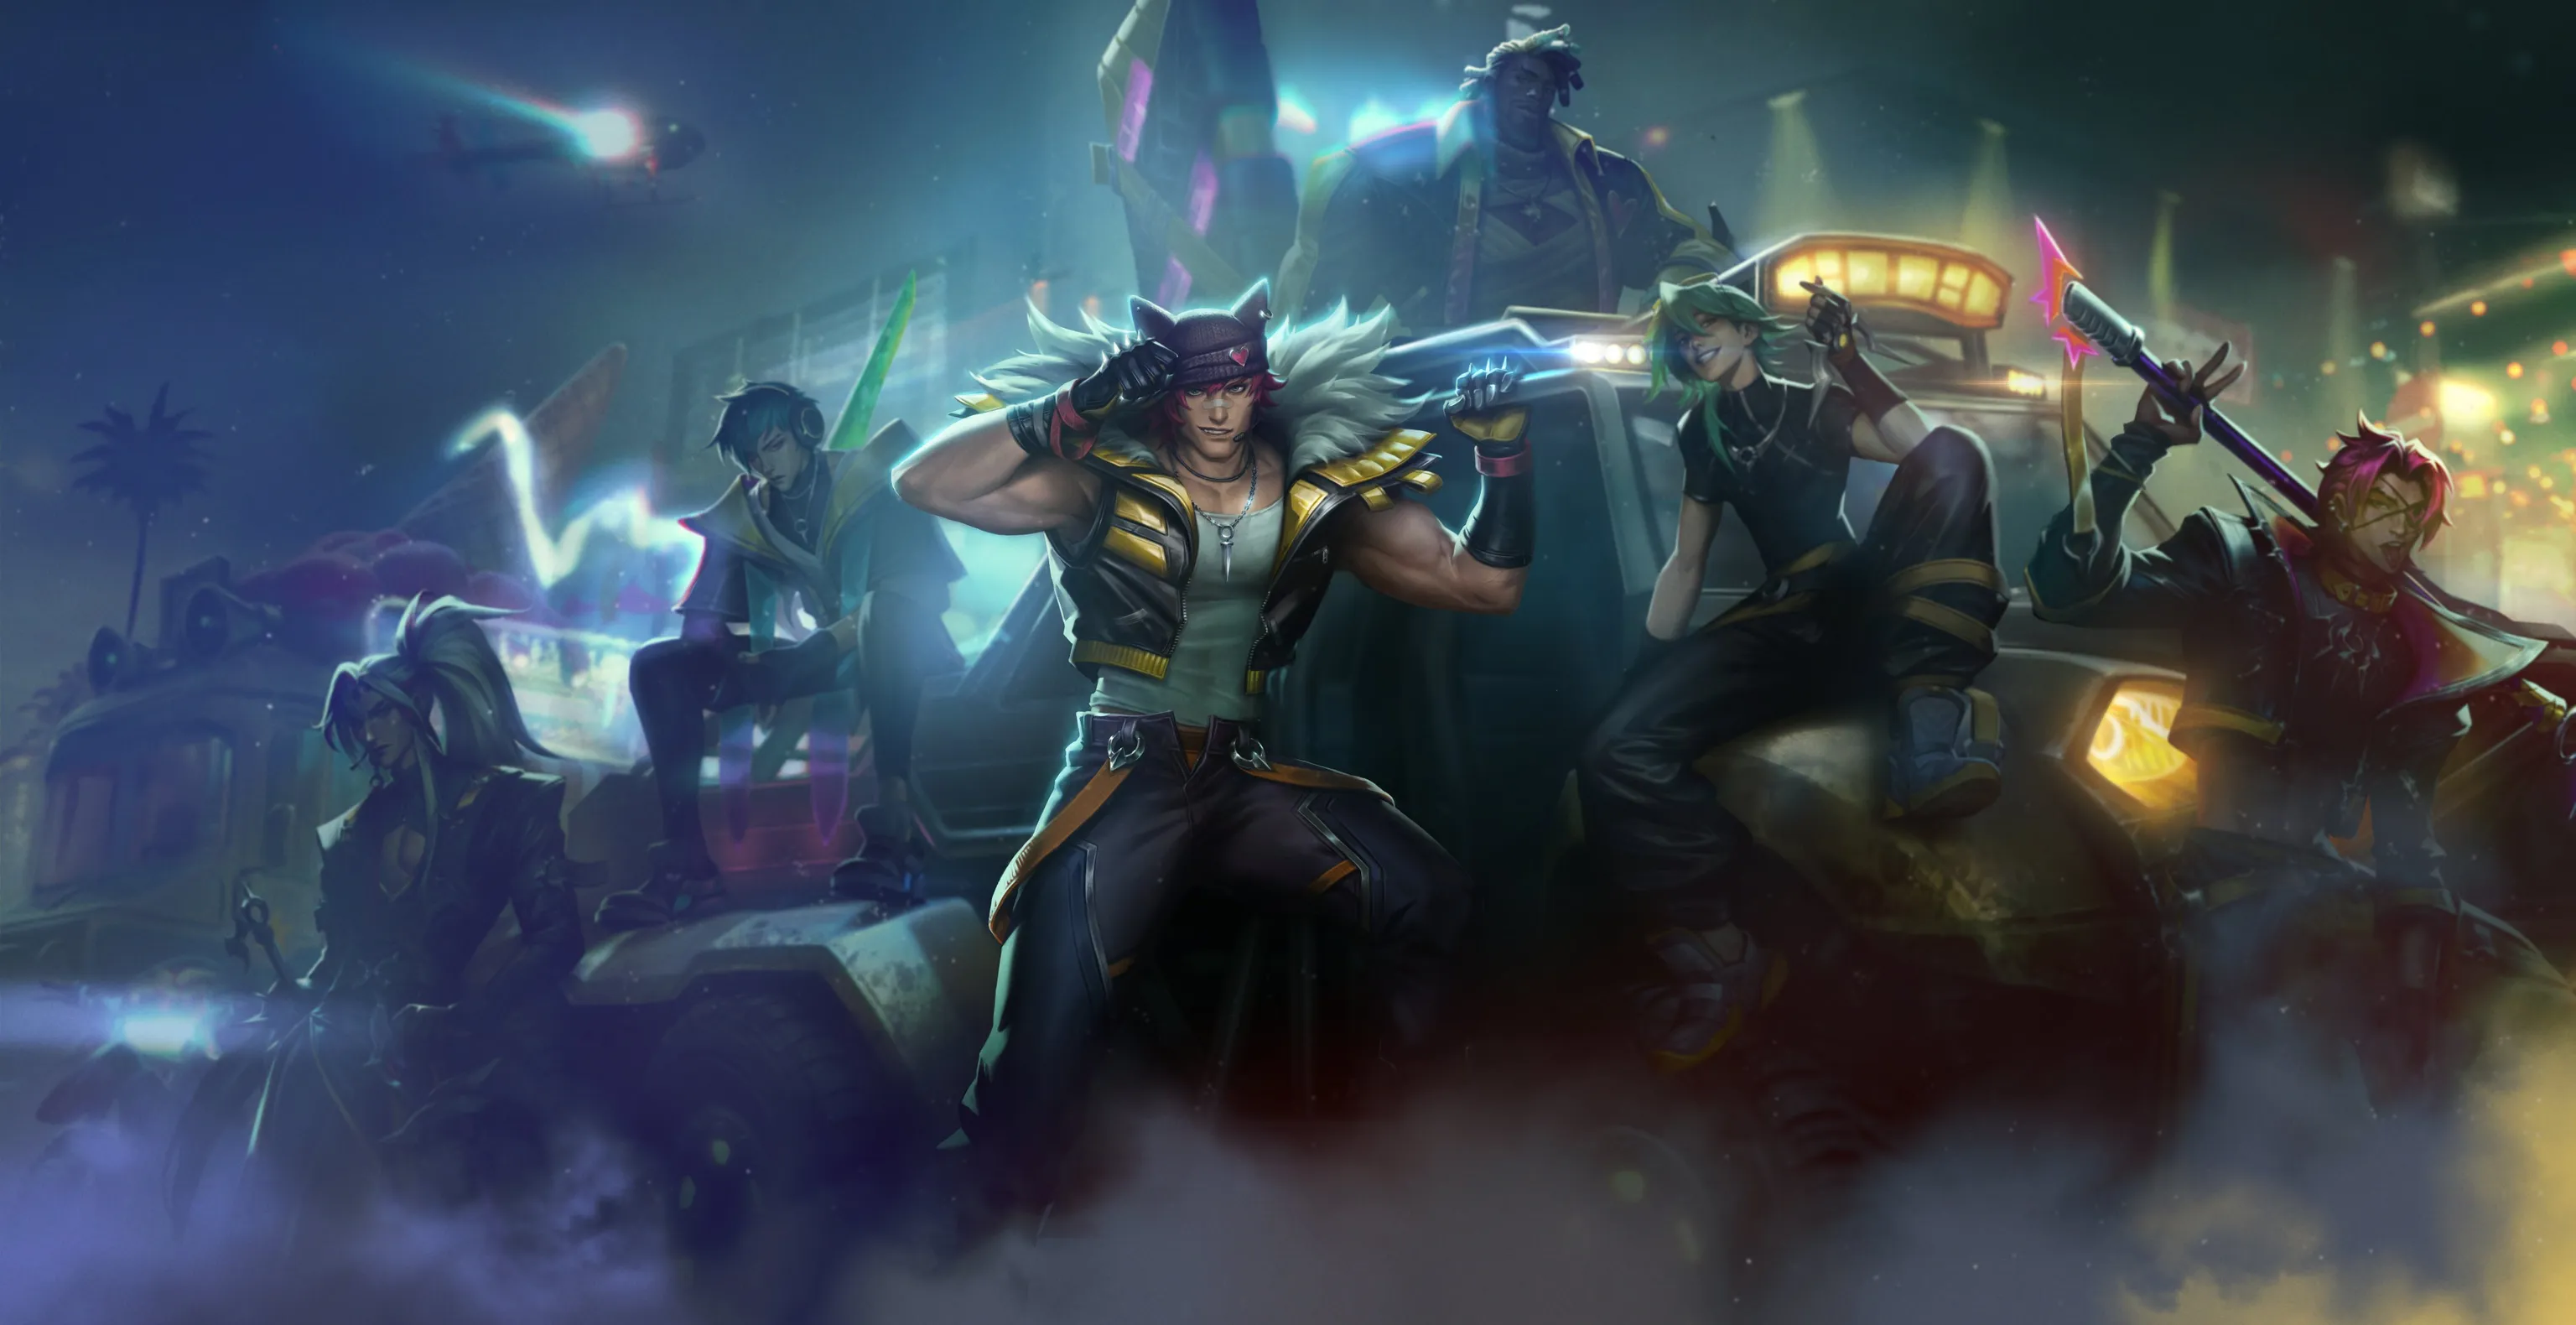 LoL Update 13.22 Patch Notes: Release Date, Champion Buffs And Nerfs, Item Changes, New Skins, Bug Fixes And Everything You Need To Know